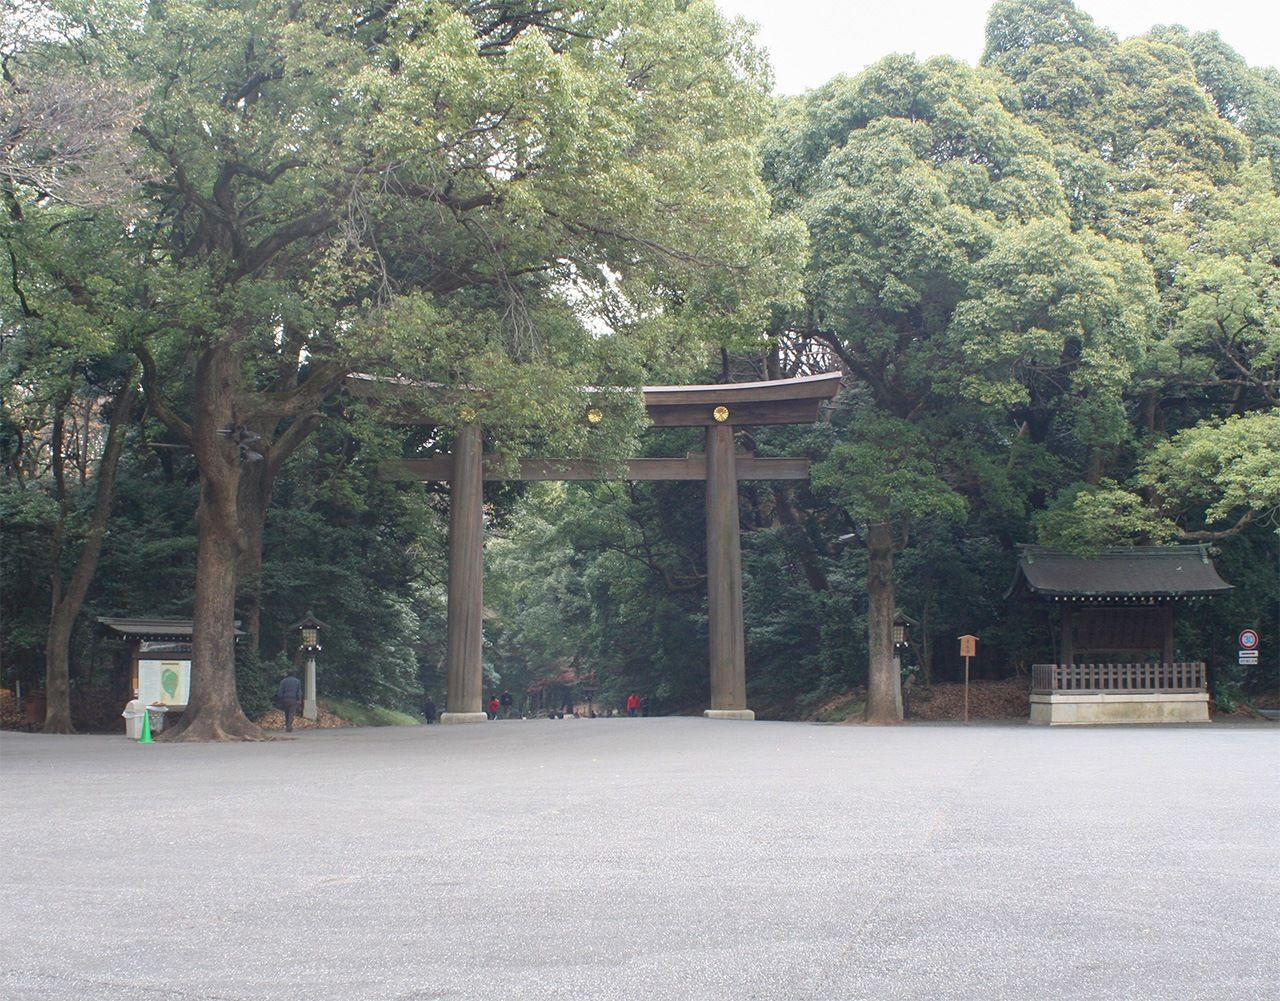 One-hundred years on, the torii is now partially obscured from view.